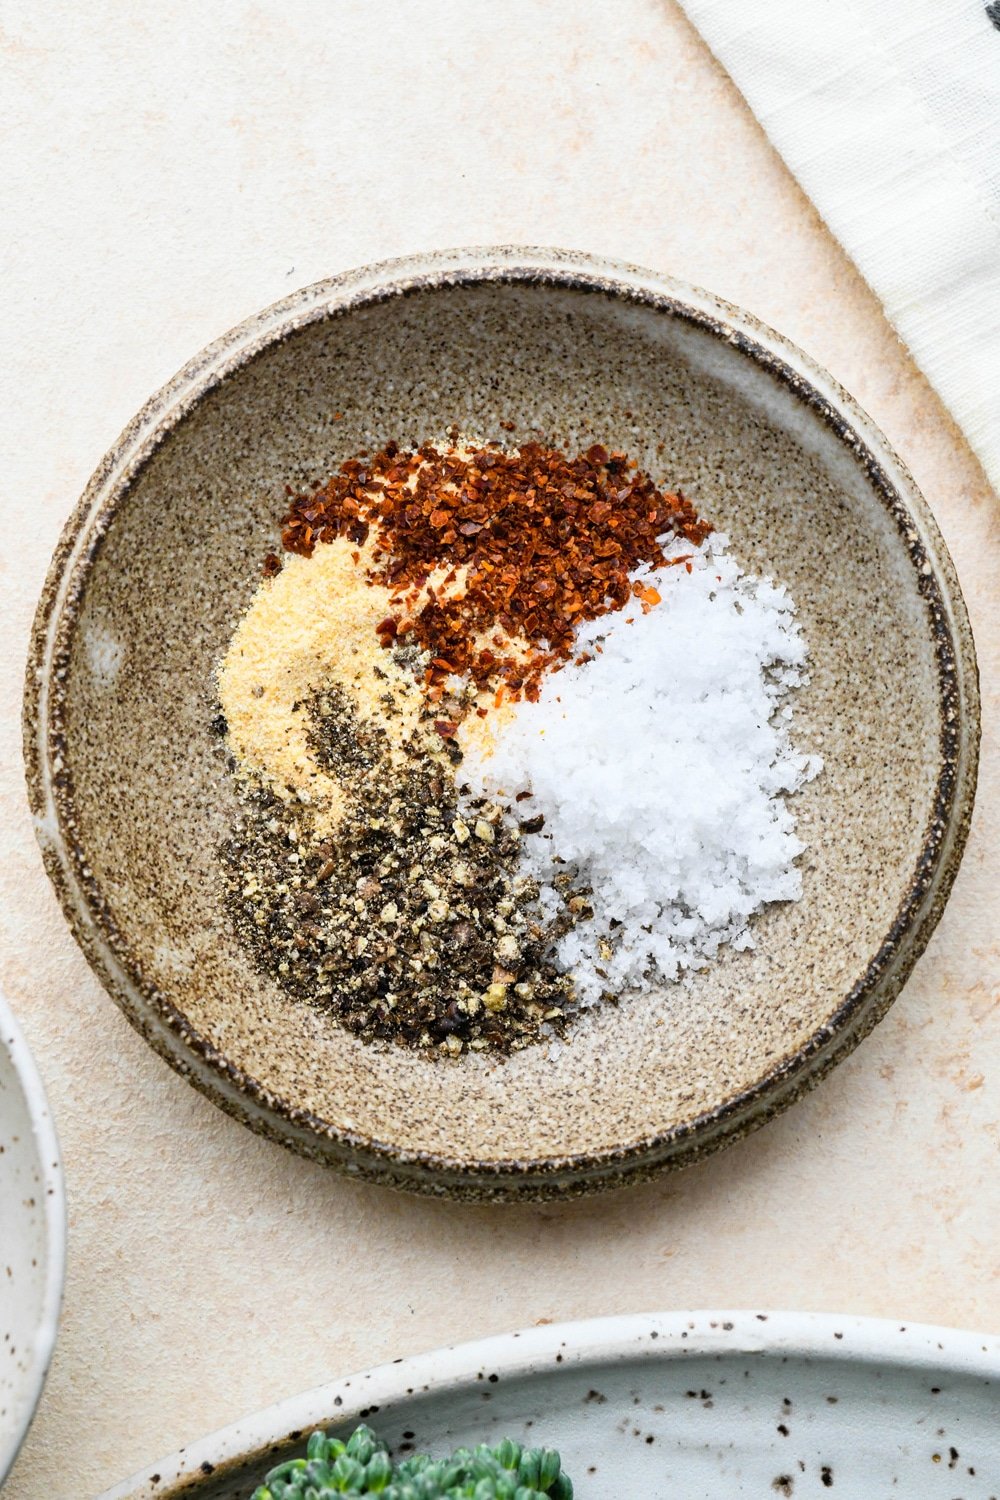 Garlic powder, chili flakes, kosher salt, and freshly ground black pepper in a small shallow ceramic pinch dish on a cream colored background.